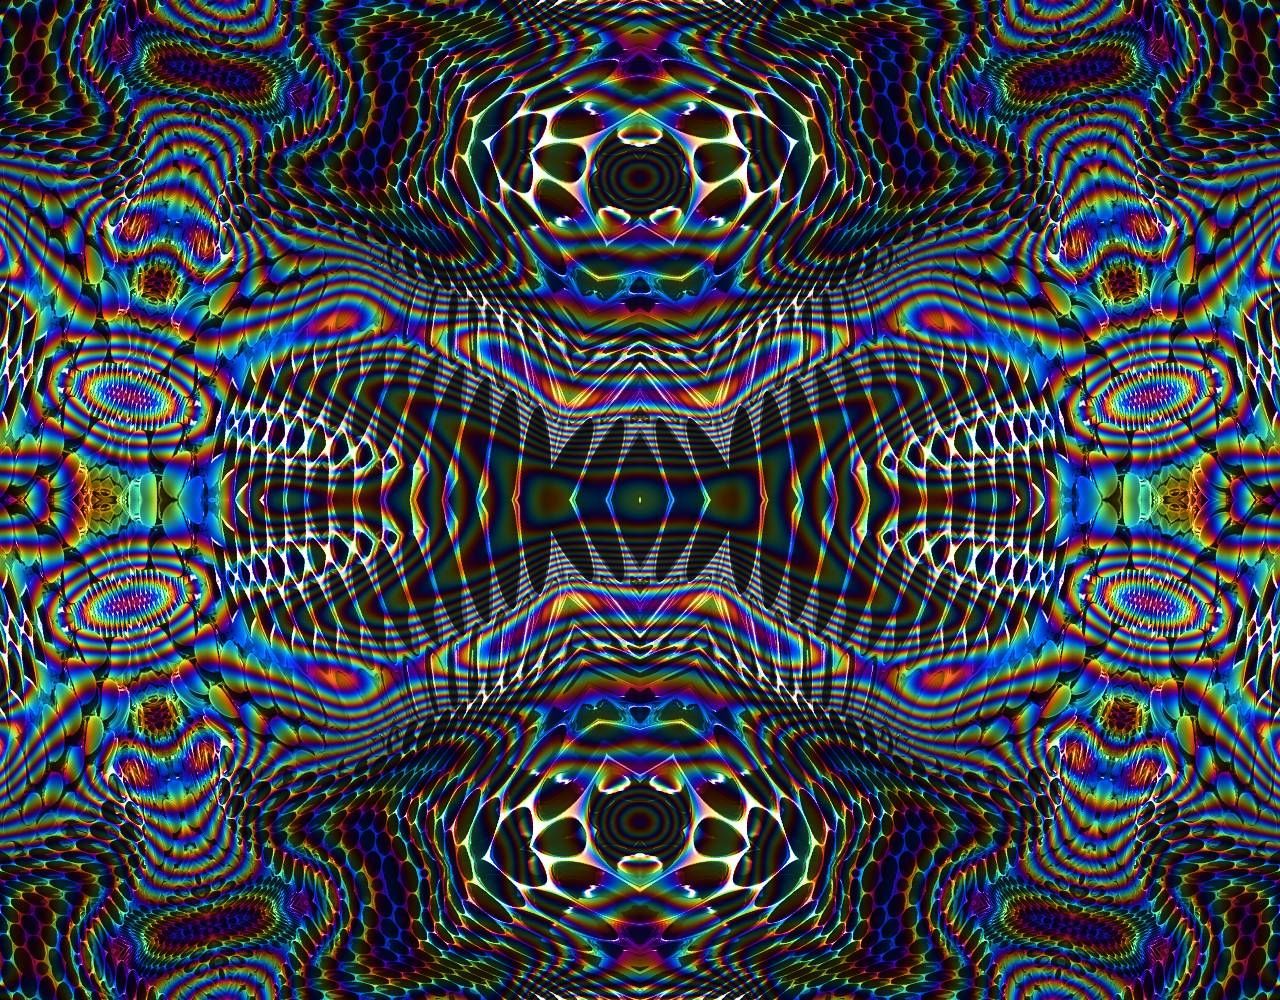 Psychedelic HD Wallpapers Wallpaper 1440 × 900 Psychedelic Wallpapers